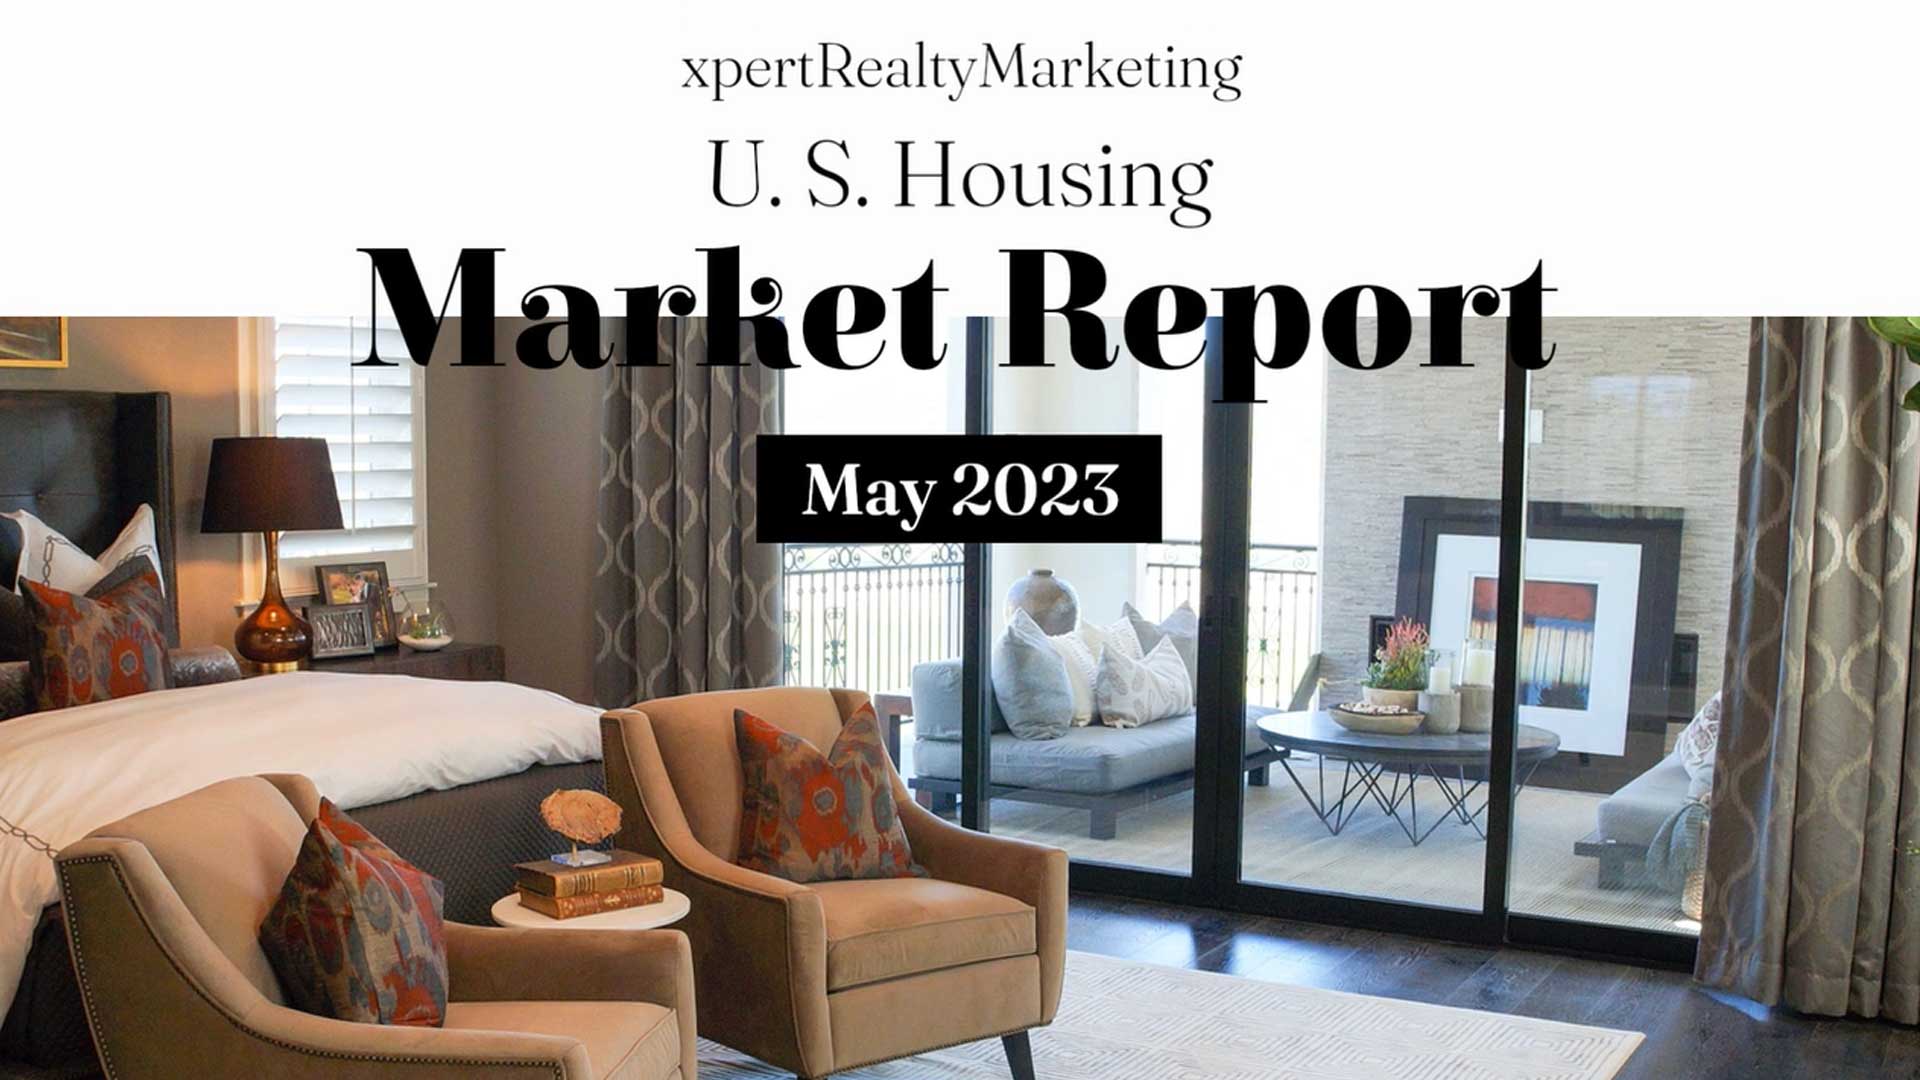 U.S. Housing Market Report for May 2023